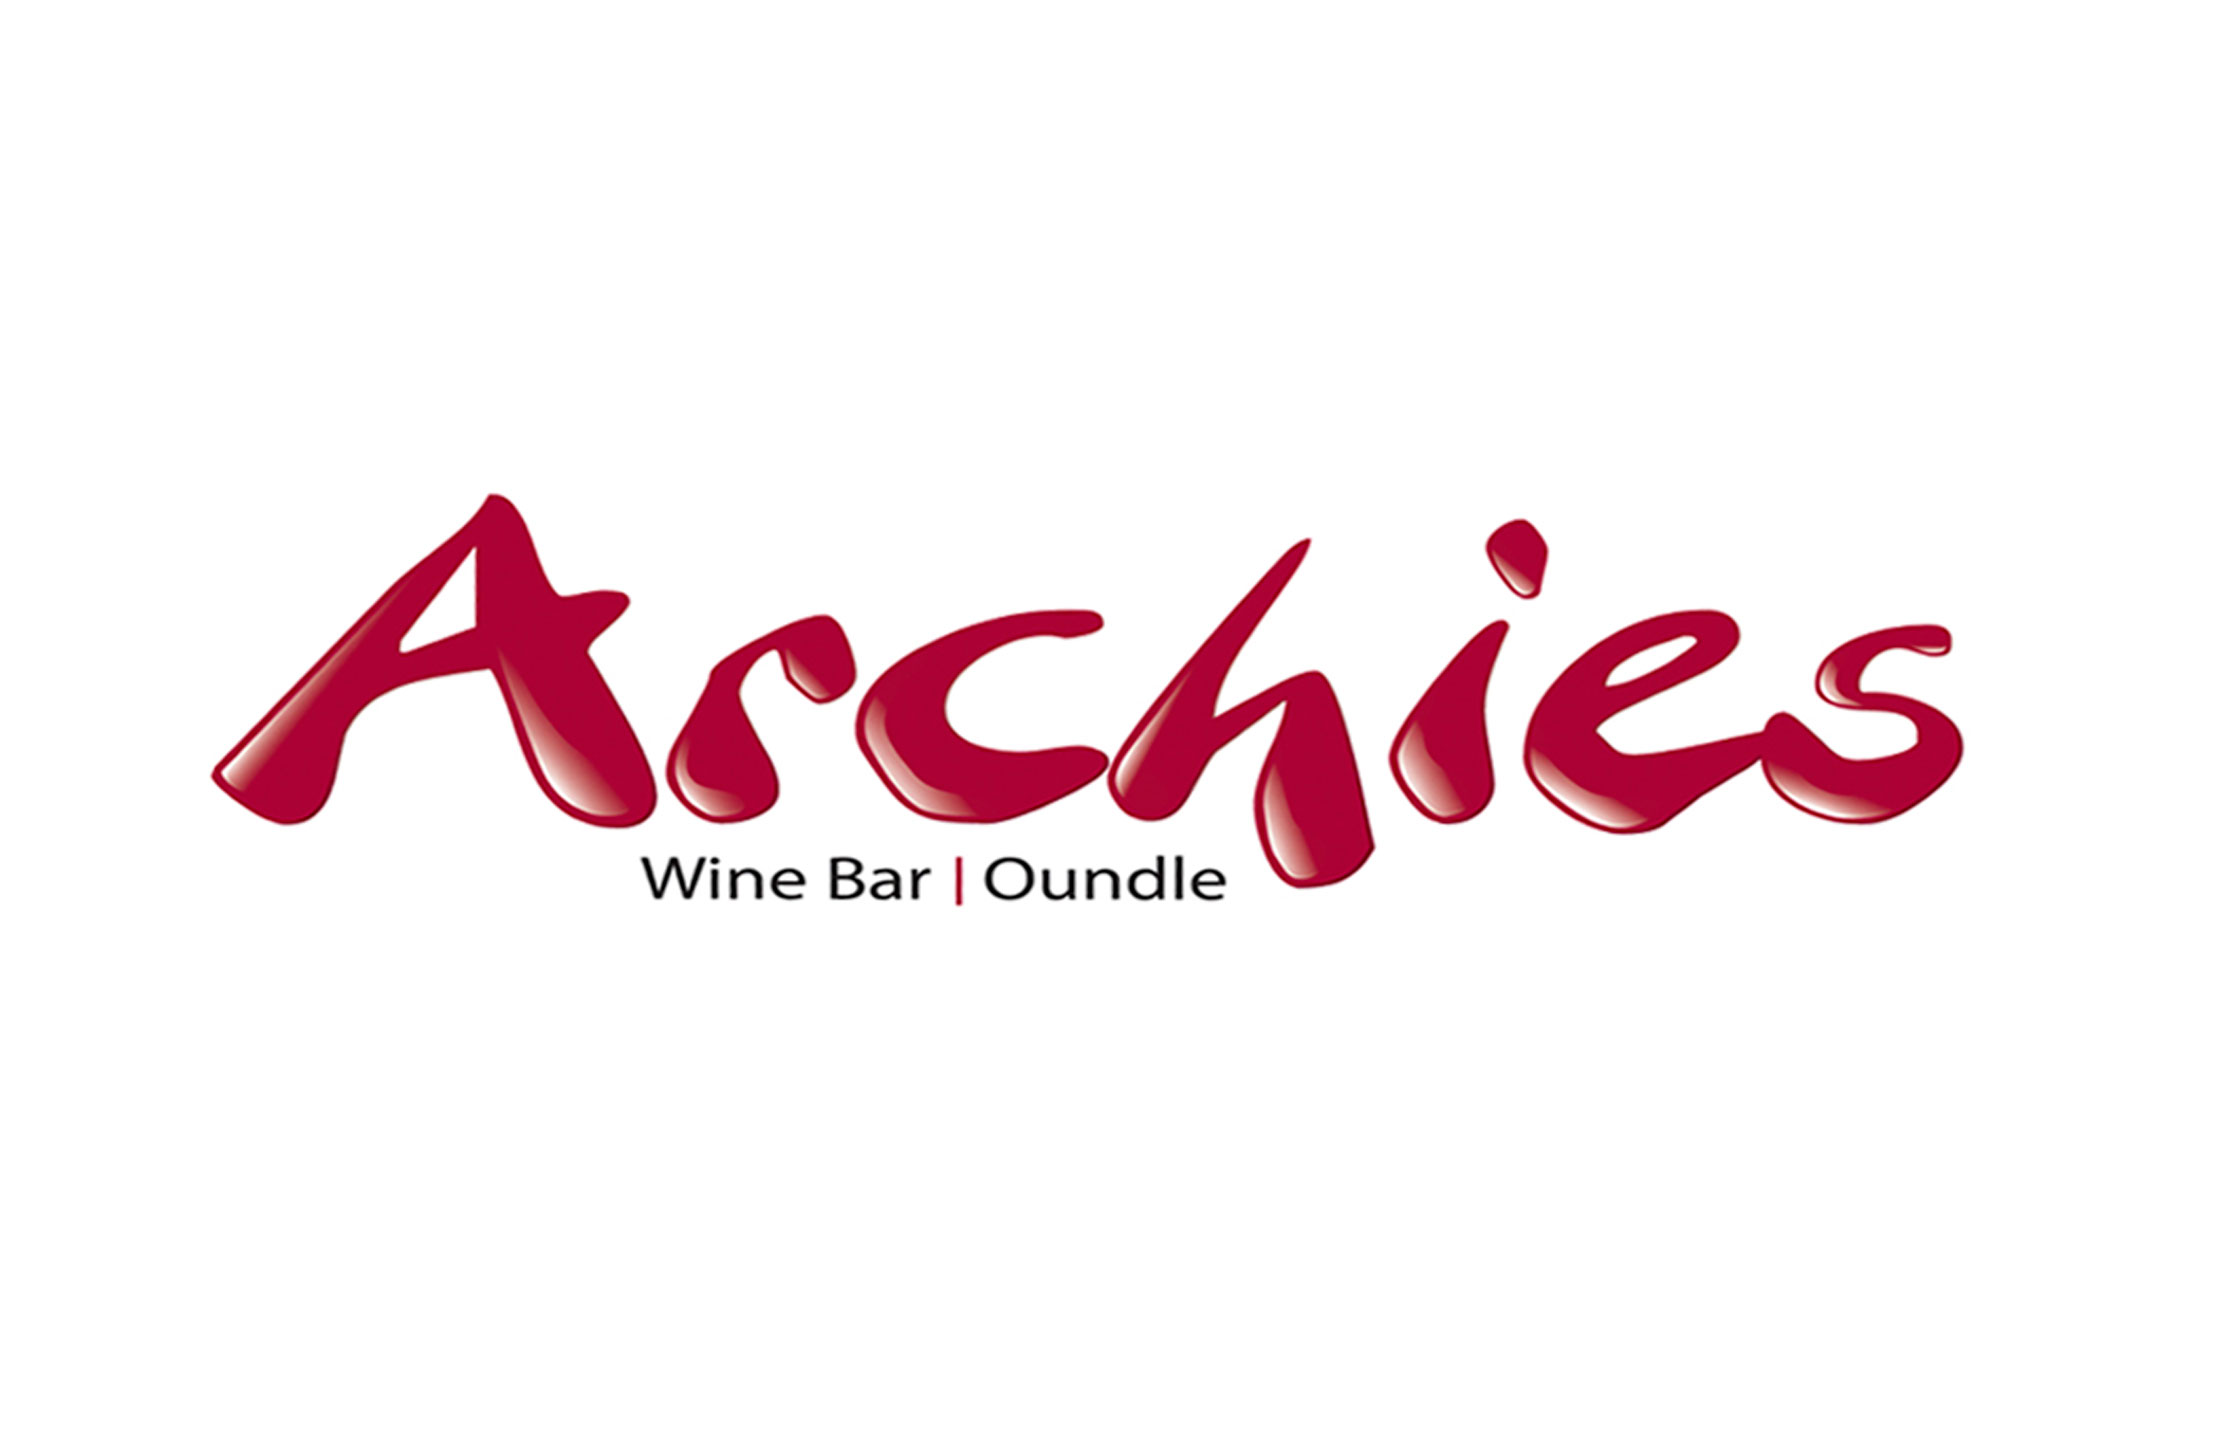 Proposed Logo for Archies Wine Bar